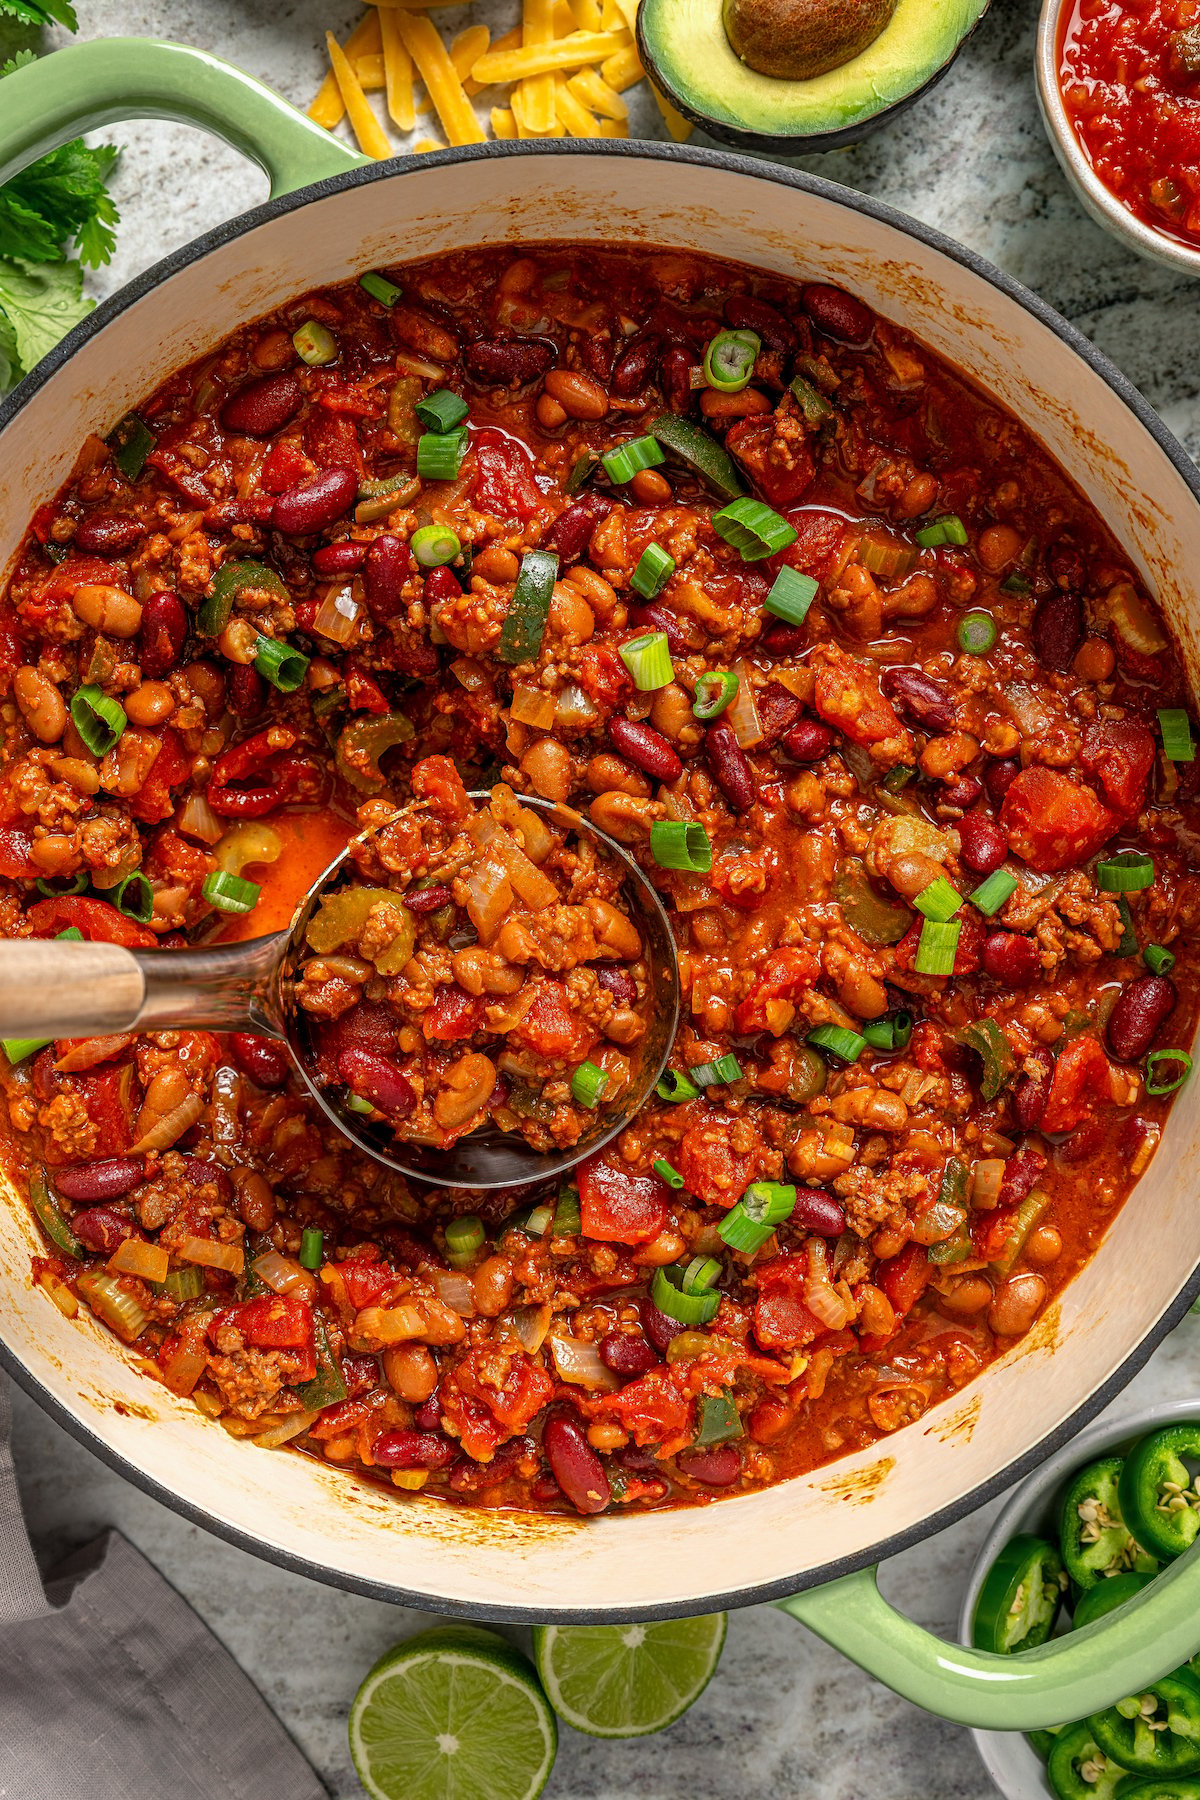 Grabbing a spoonful of the chunky turkey chili.